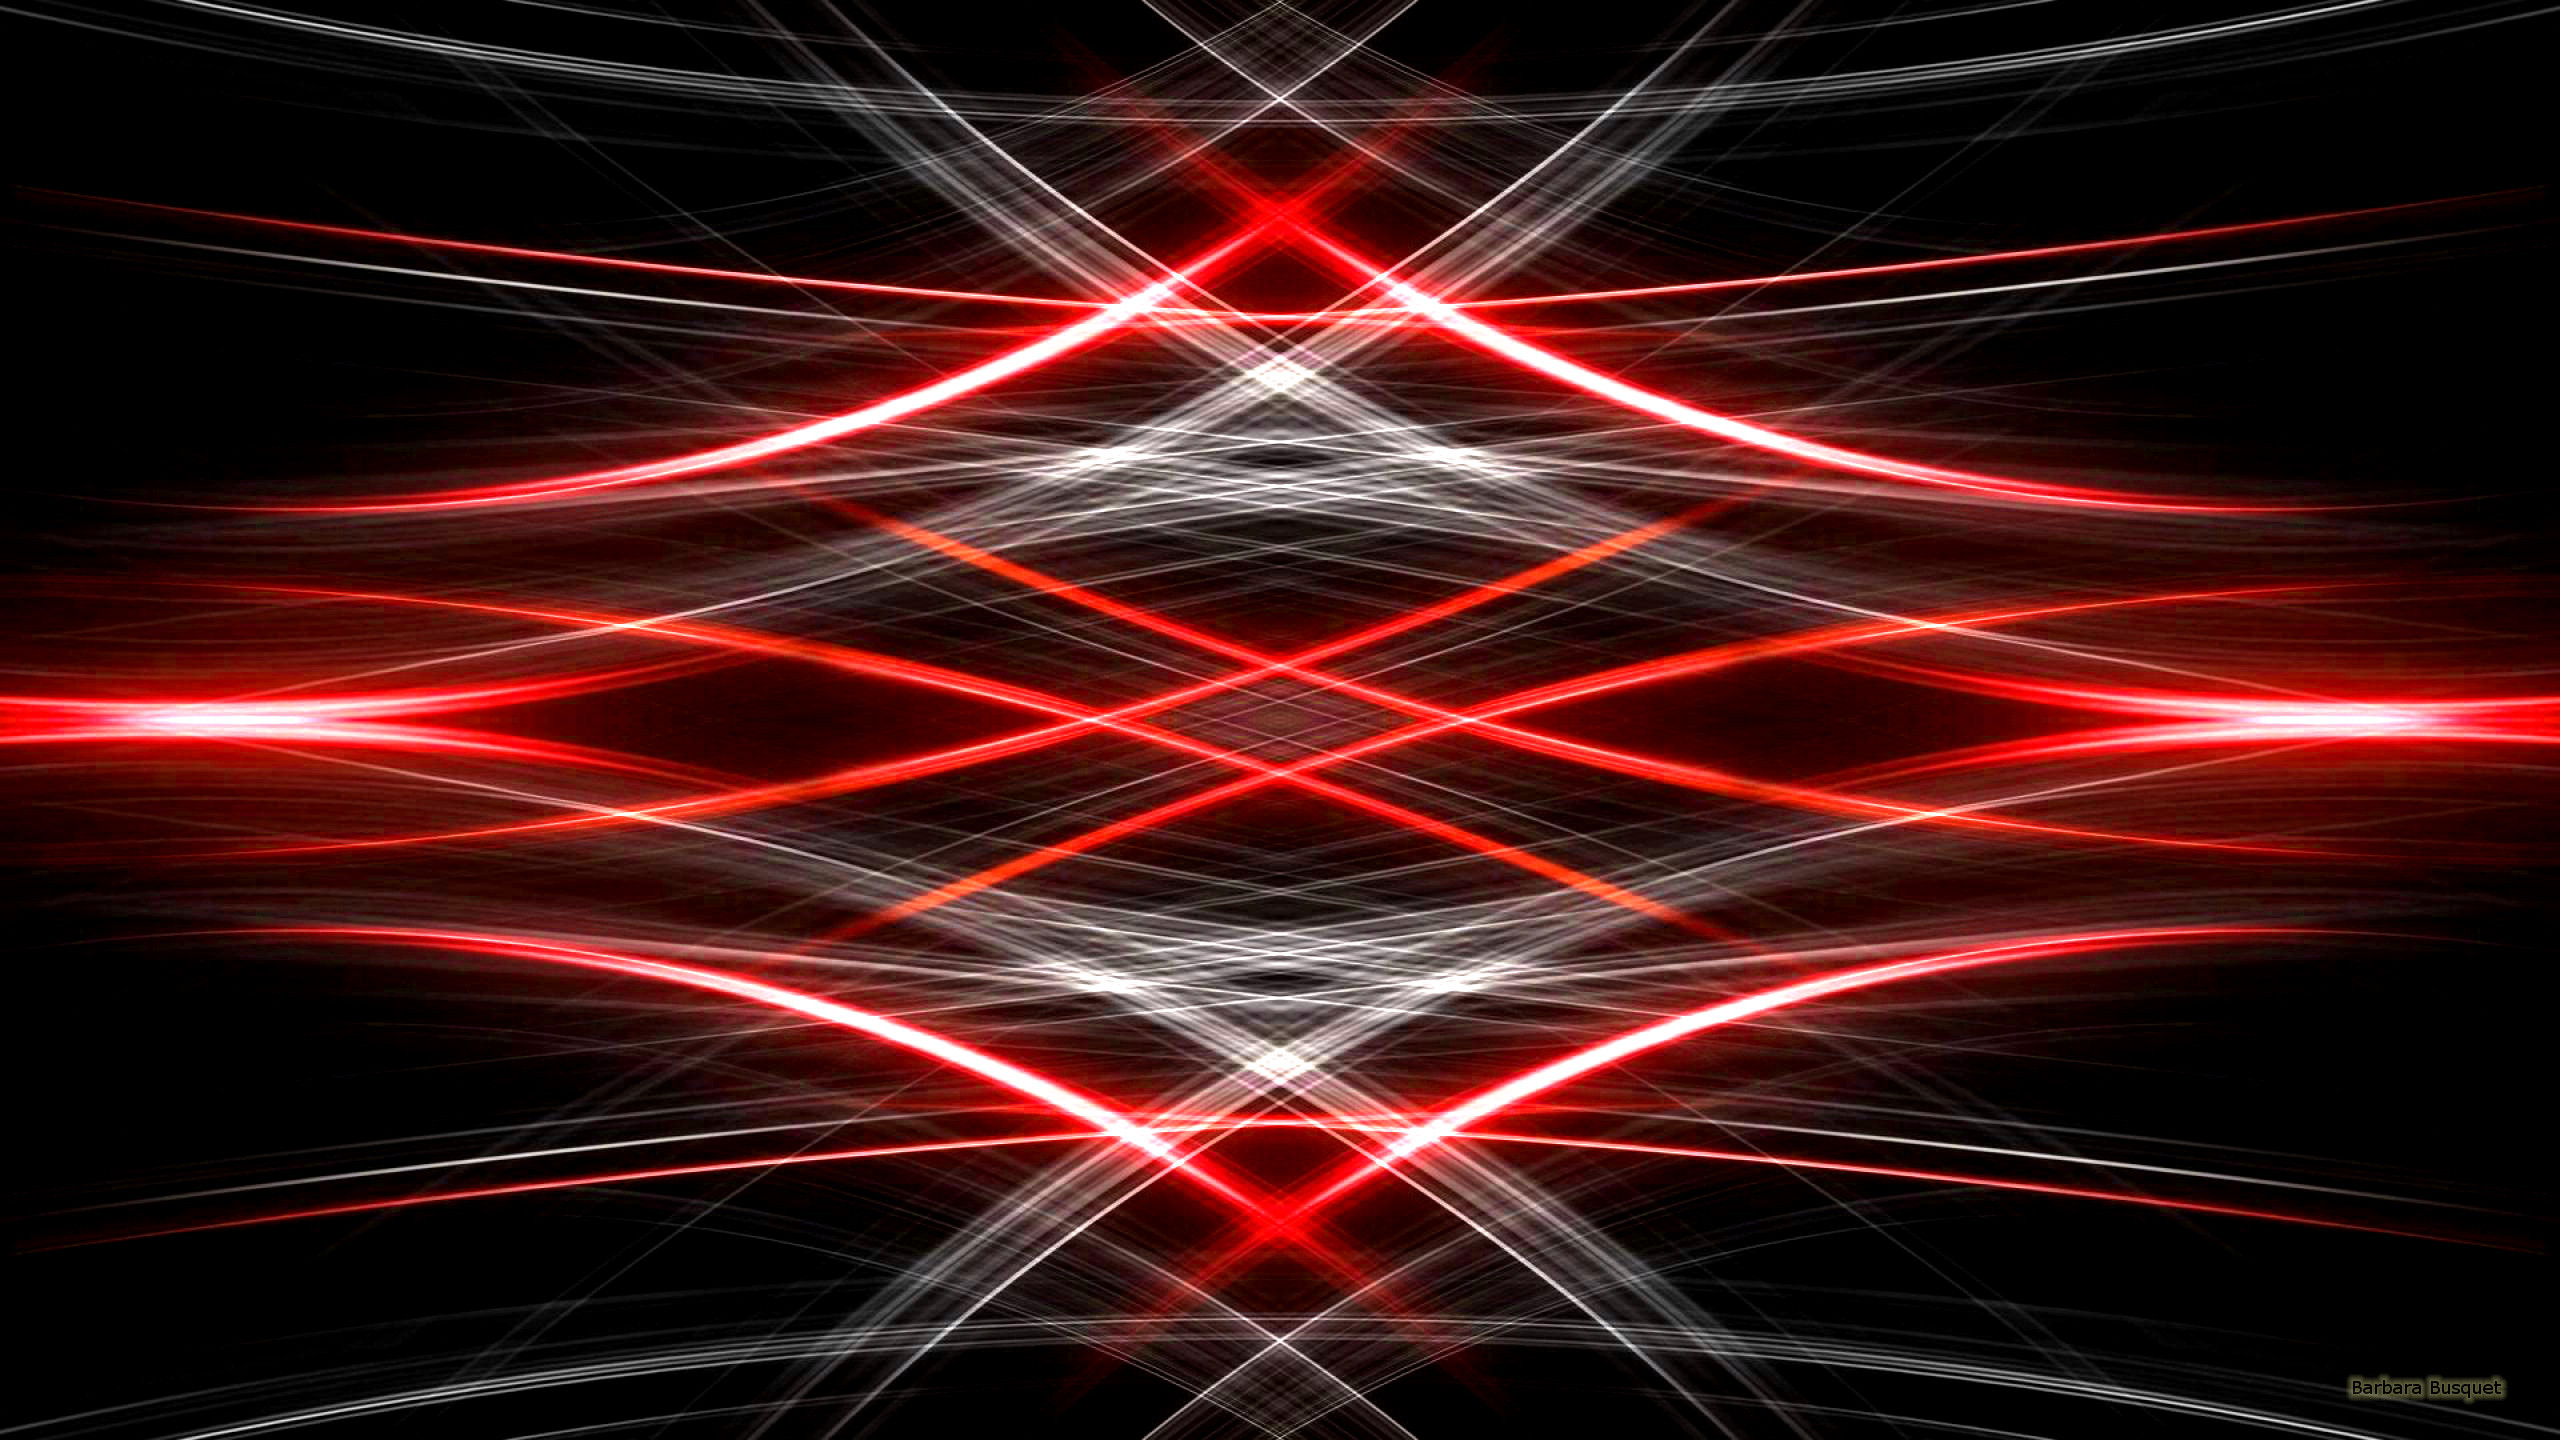 2560x1440 Black abstract wallpaper with red and white lights. The lines are mirrored.